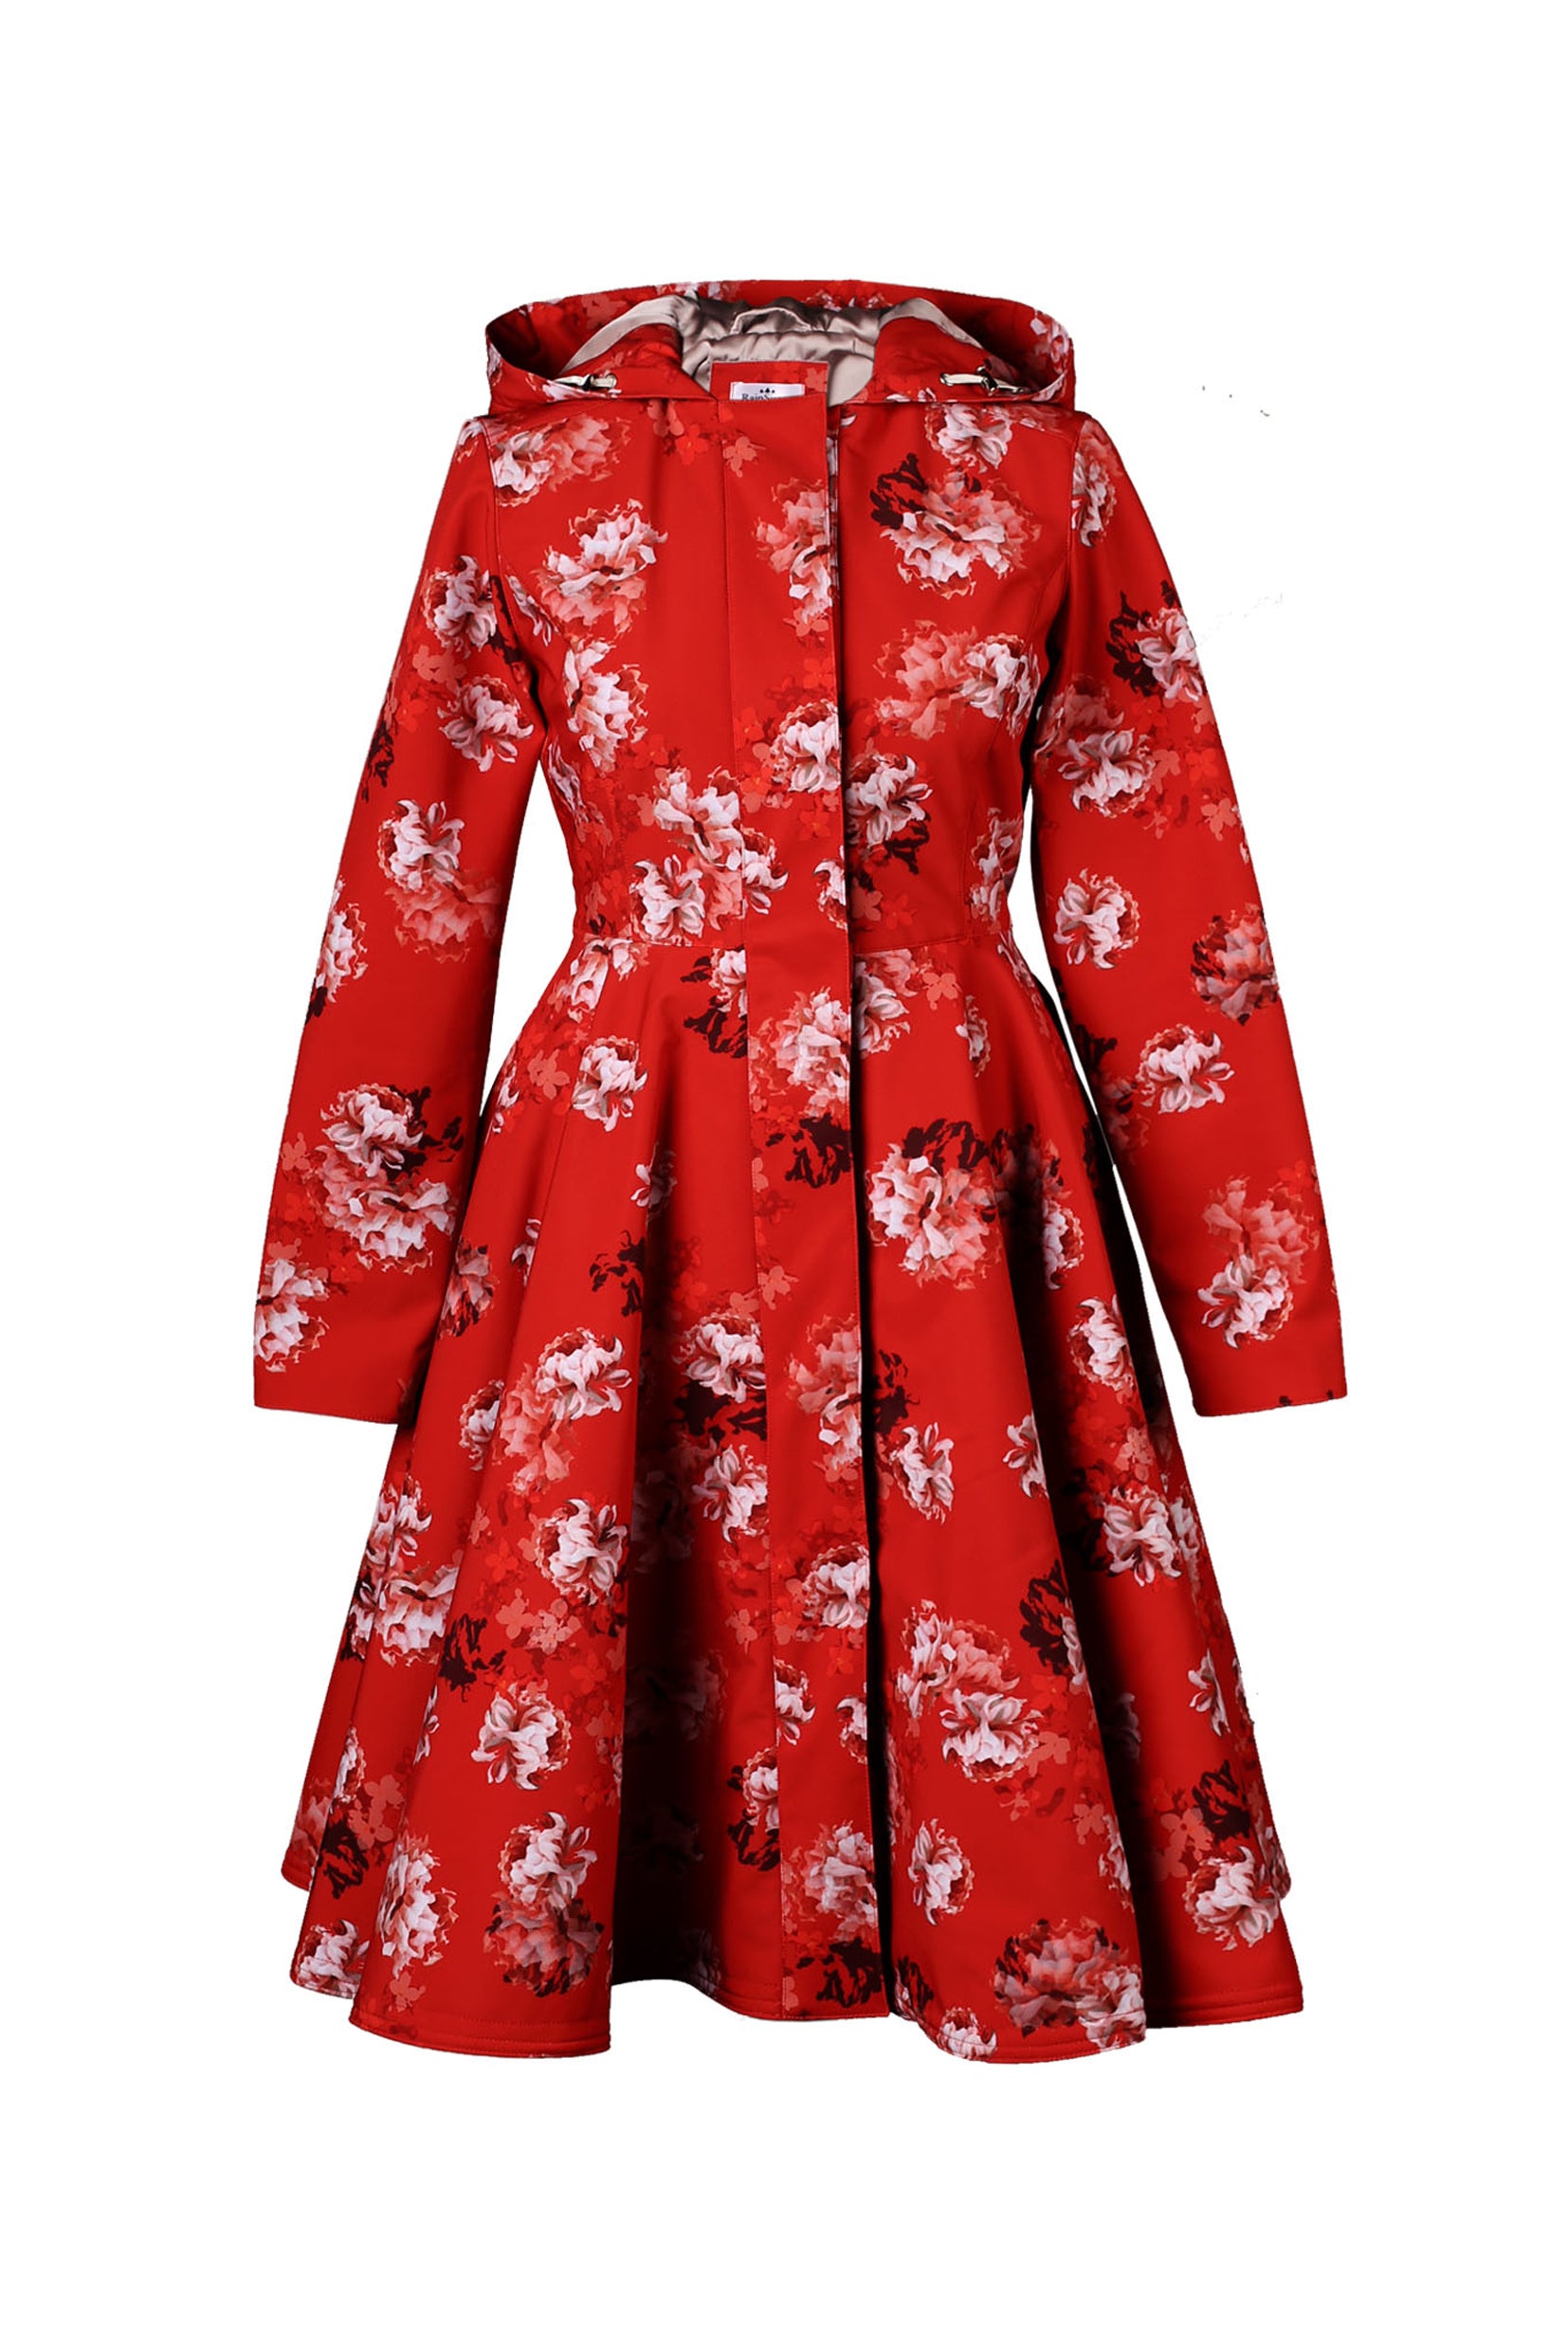 Red Women's Raincoat with peony flower print